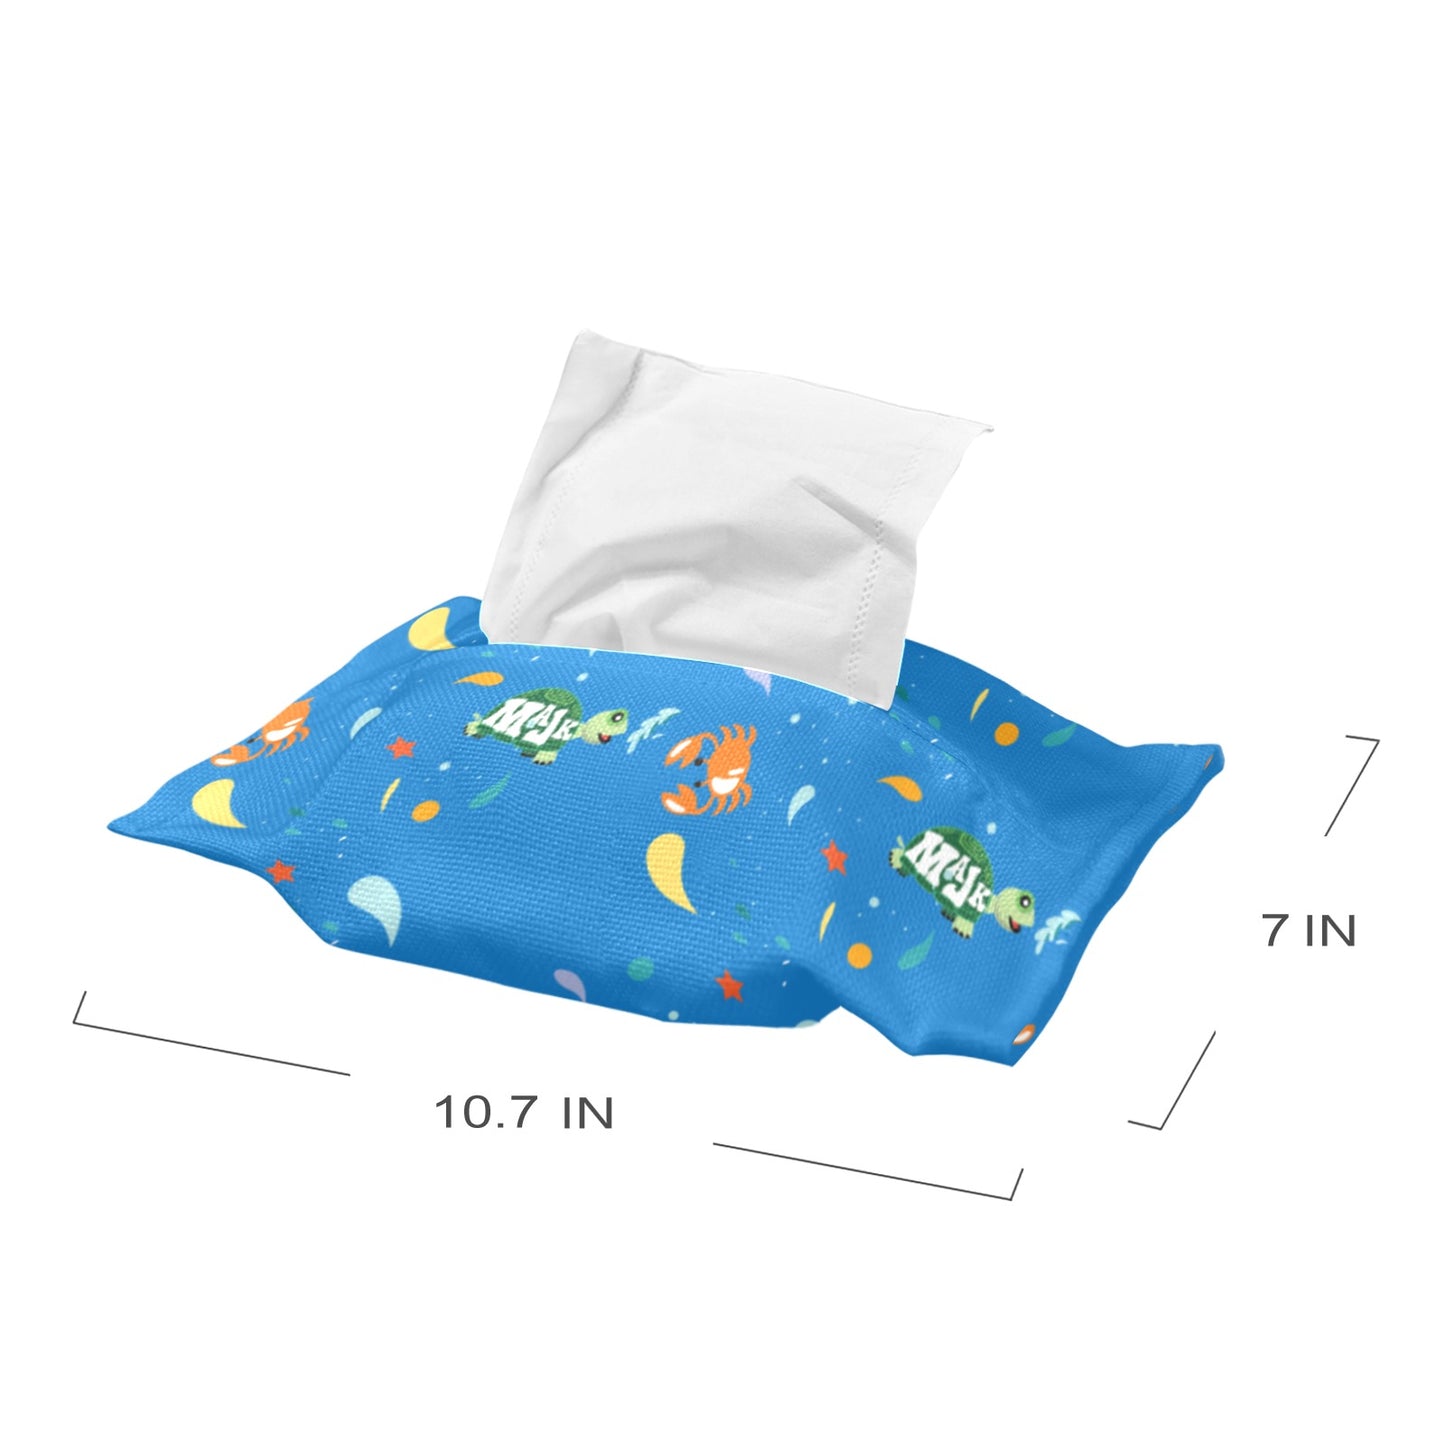 Tissue Box Cover/wipes cover "Surf's Up"